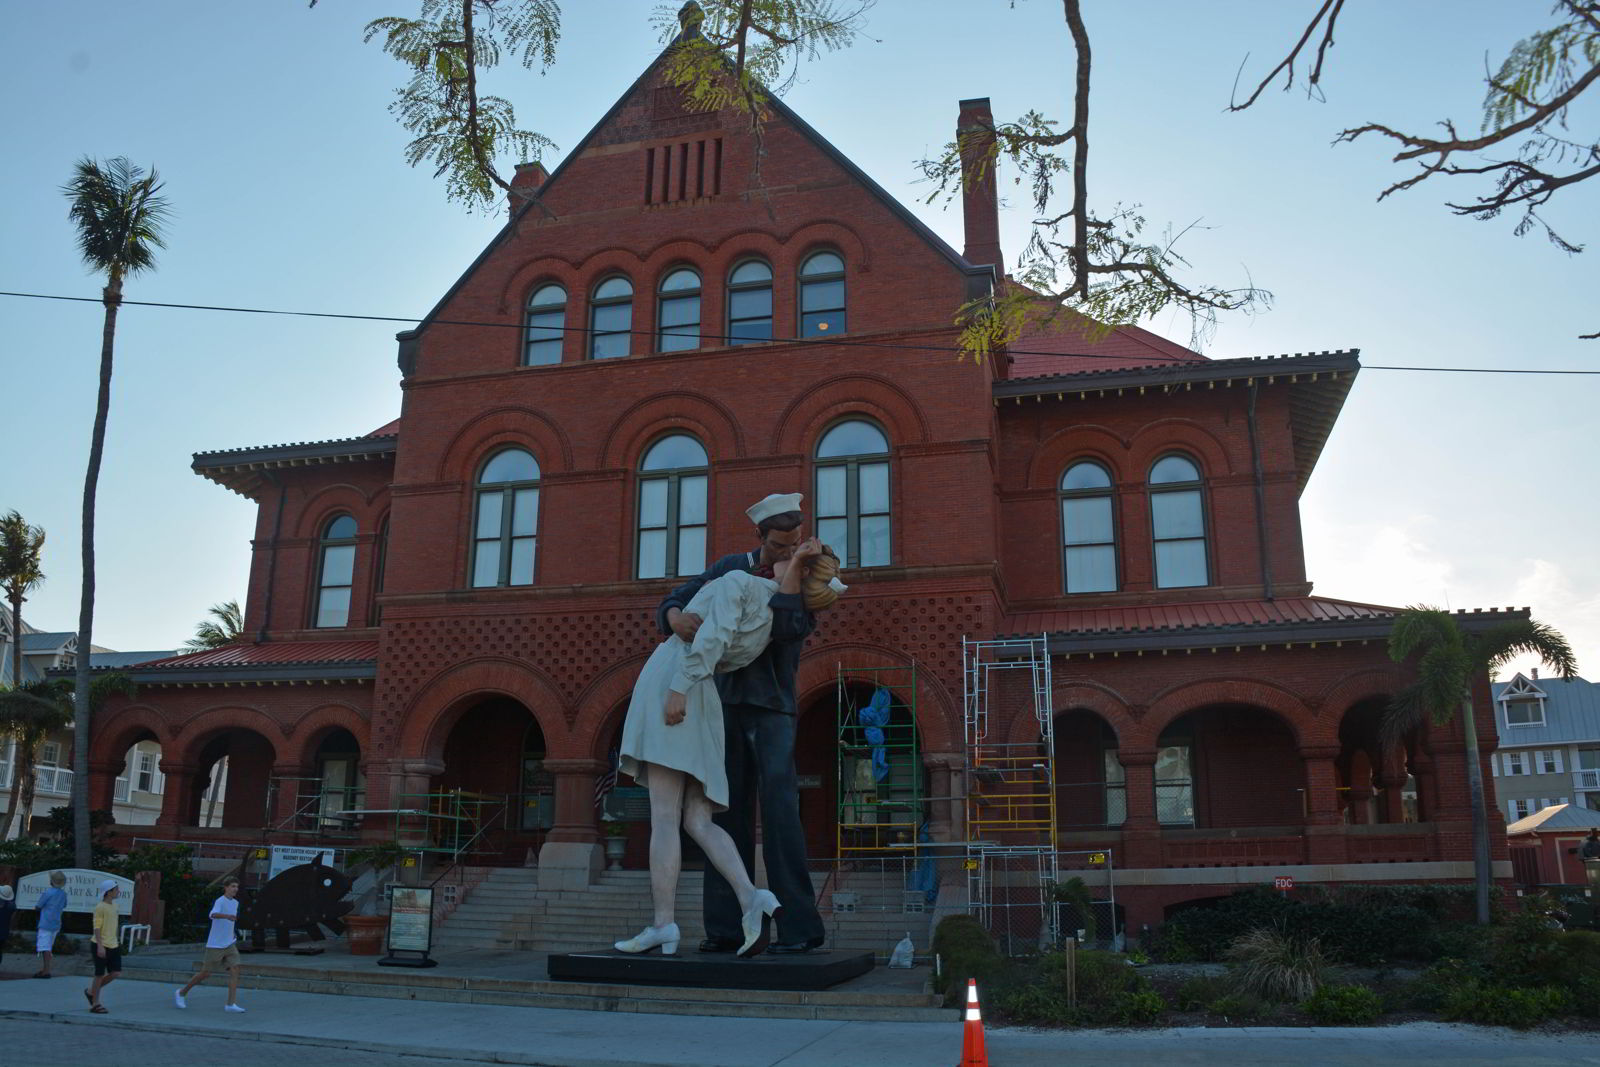 An image of "Embracing Peace," the 25-foot high sculpture by Seward Johnson depicting the iconic 1945 image of a sailor planting a kiss on a nurse. It sits outside the Custom House museum in Key West, Florida.